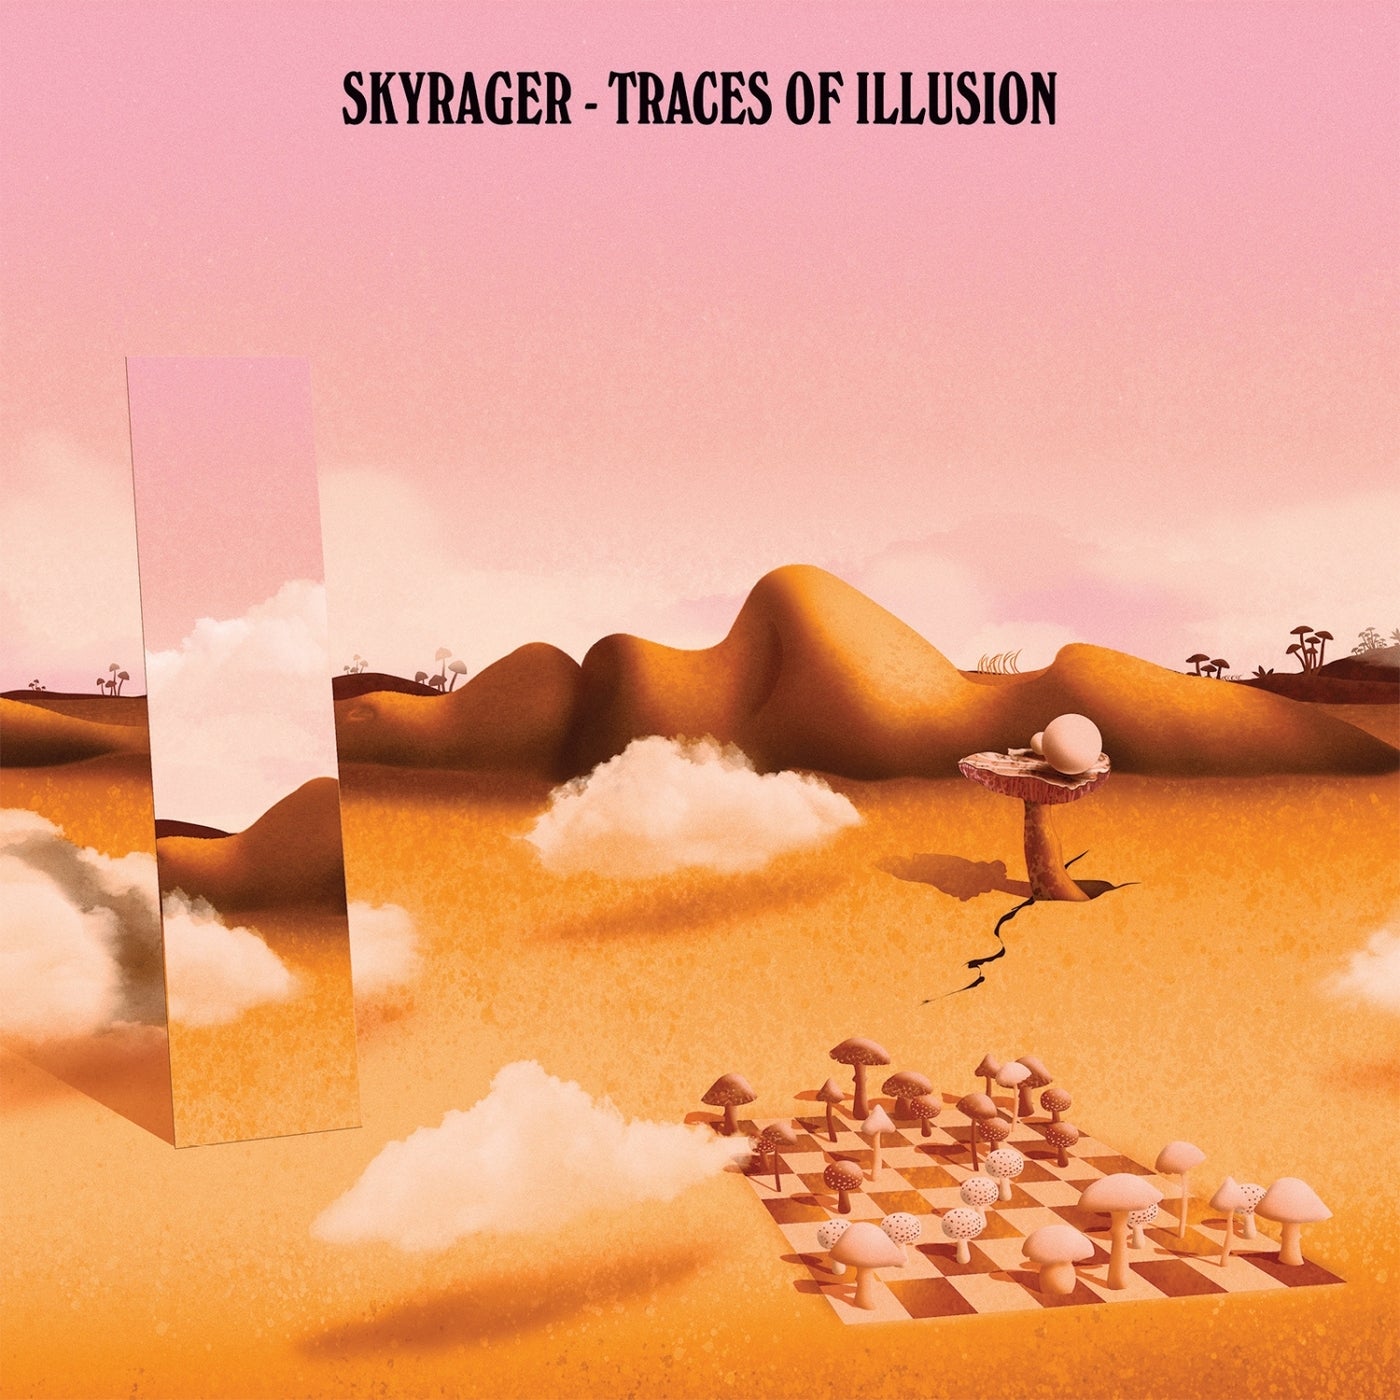 Traces of Illusion compiled by Skyrager